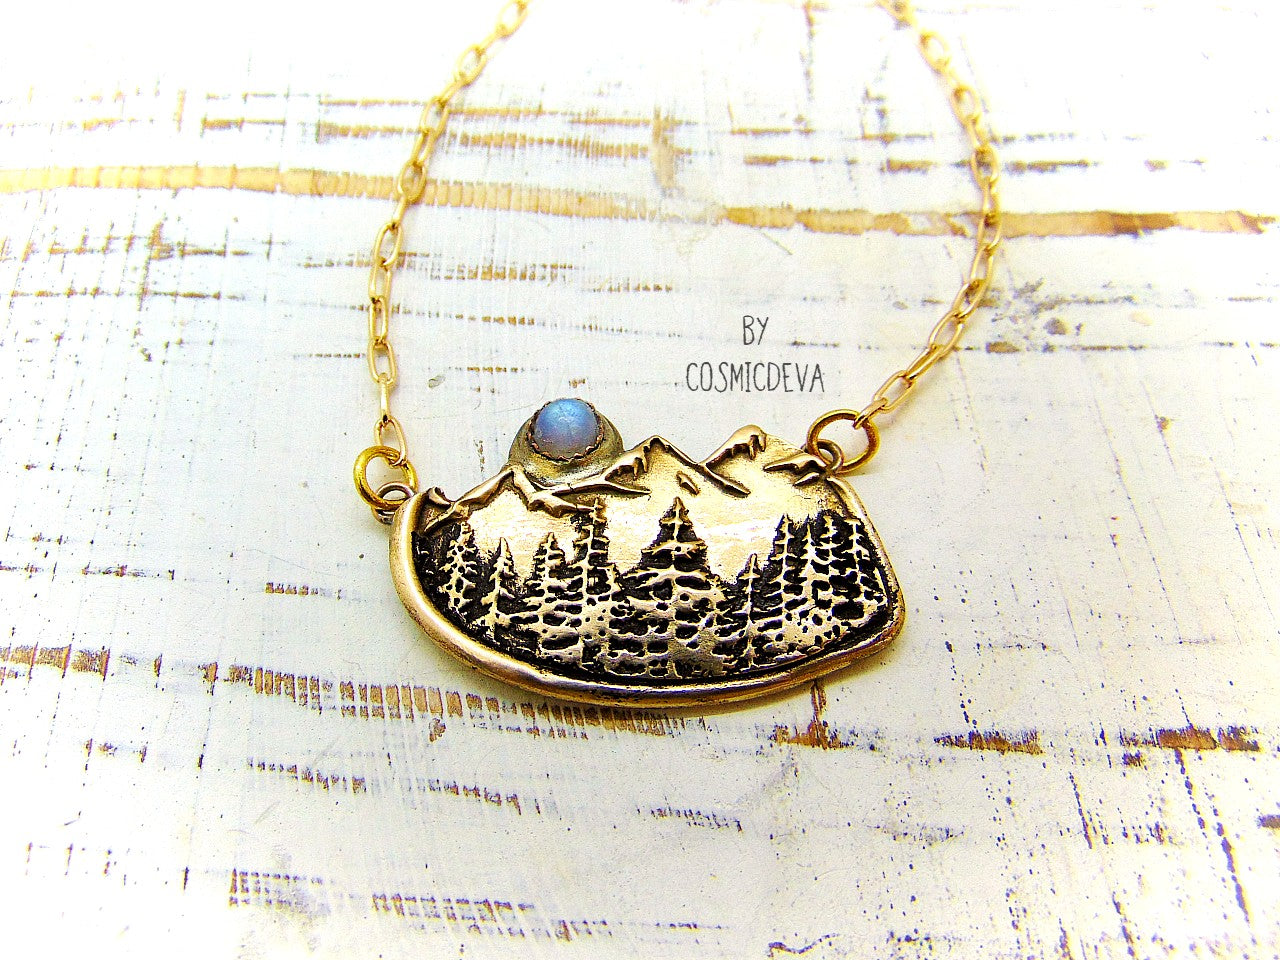 This nature lover landscape pendant necklace features the serenity of a pine forest in the enchanted wilderness of the deep woods with majestic mountains in the background. A flashy rainbow moonstone setting represents a full moon that rises above the top of the mountains. The scenery reminds of the beautiful alpine landscape of Switzerland as well as the great Rocky Mountains.